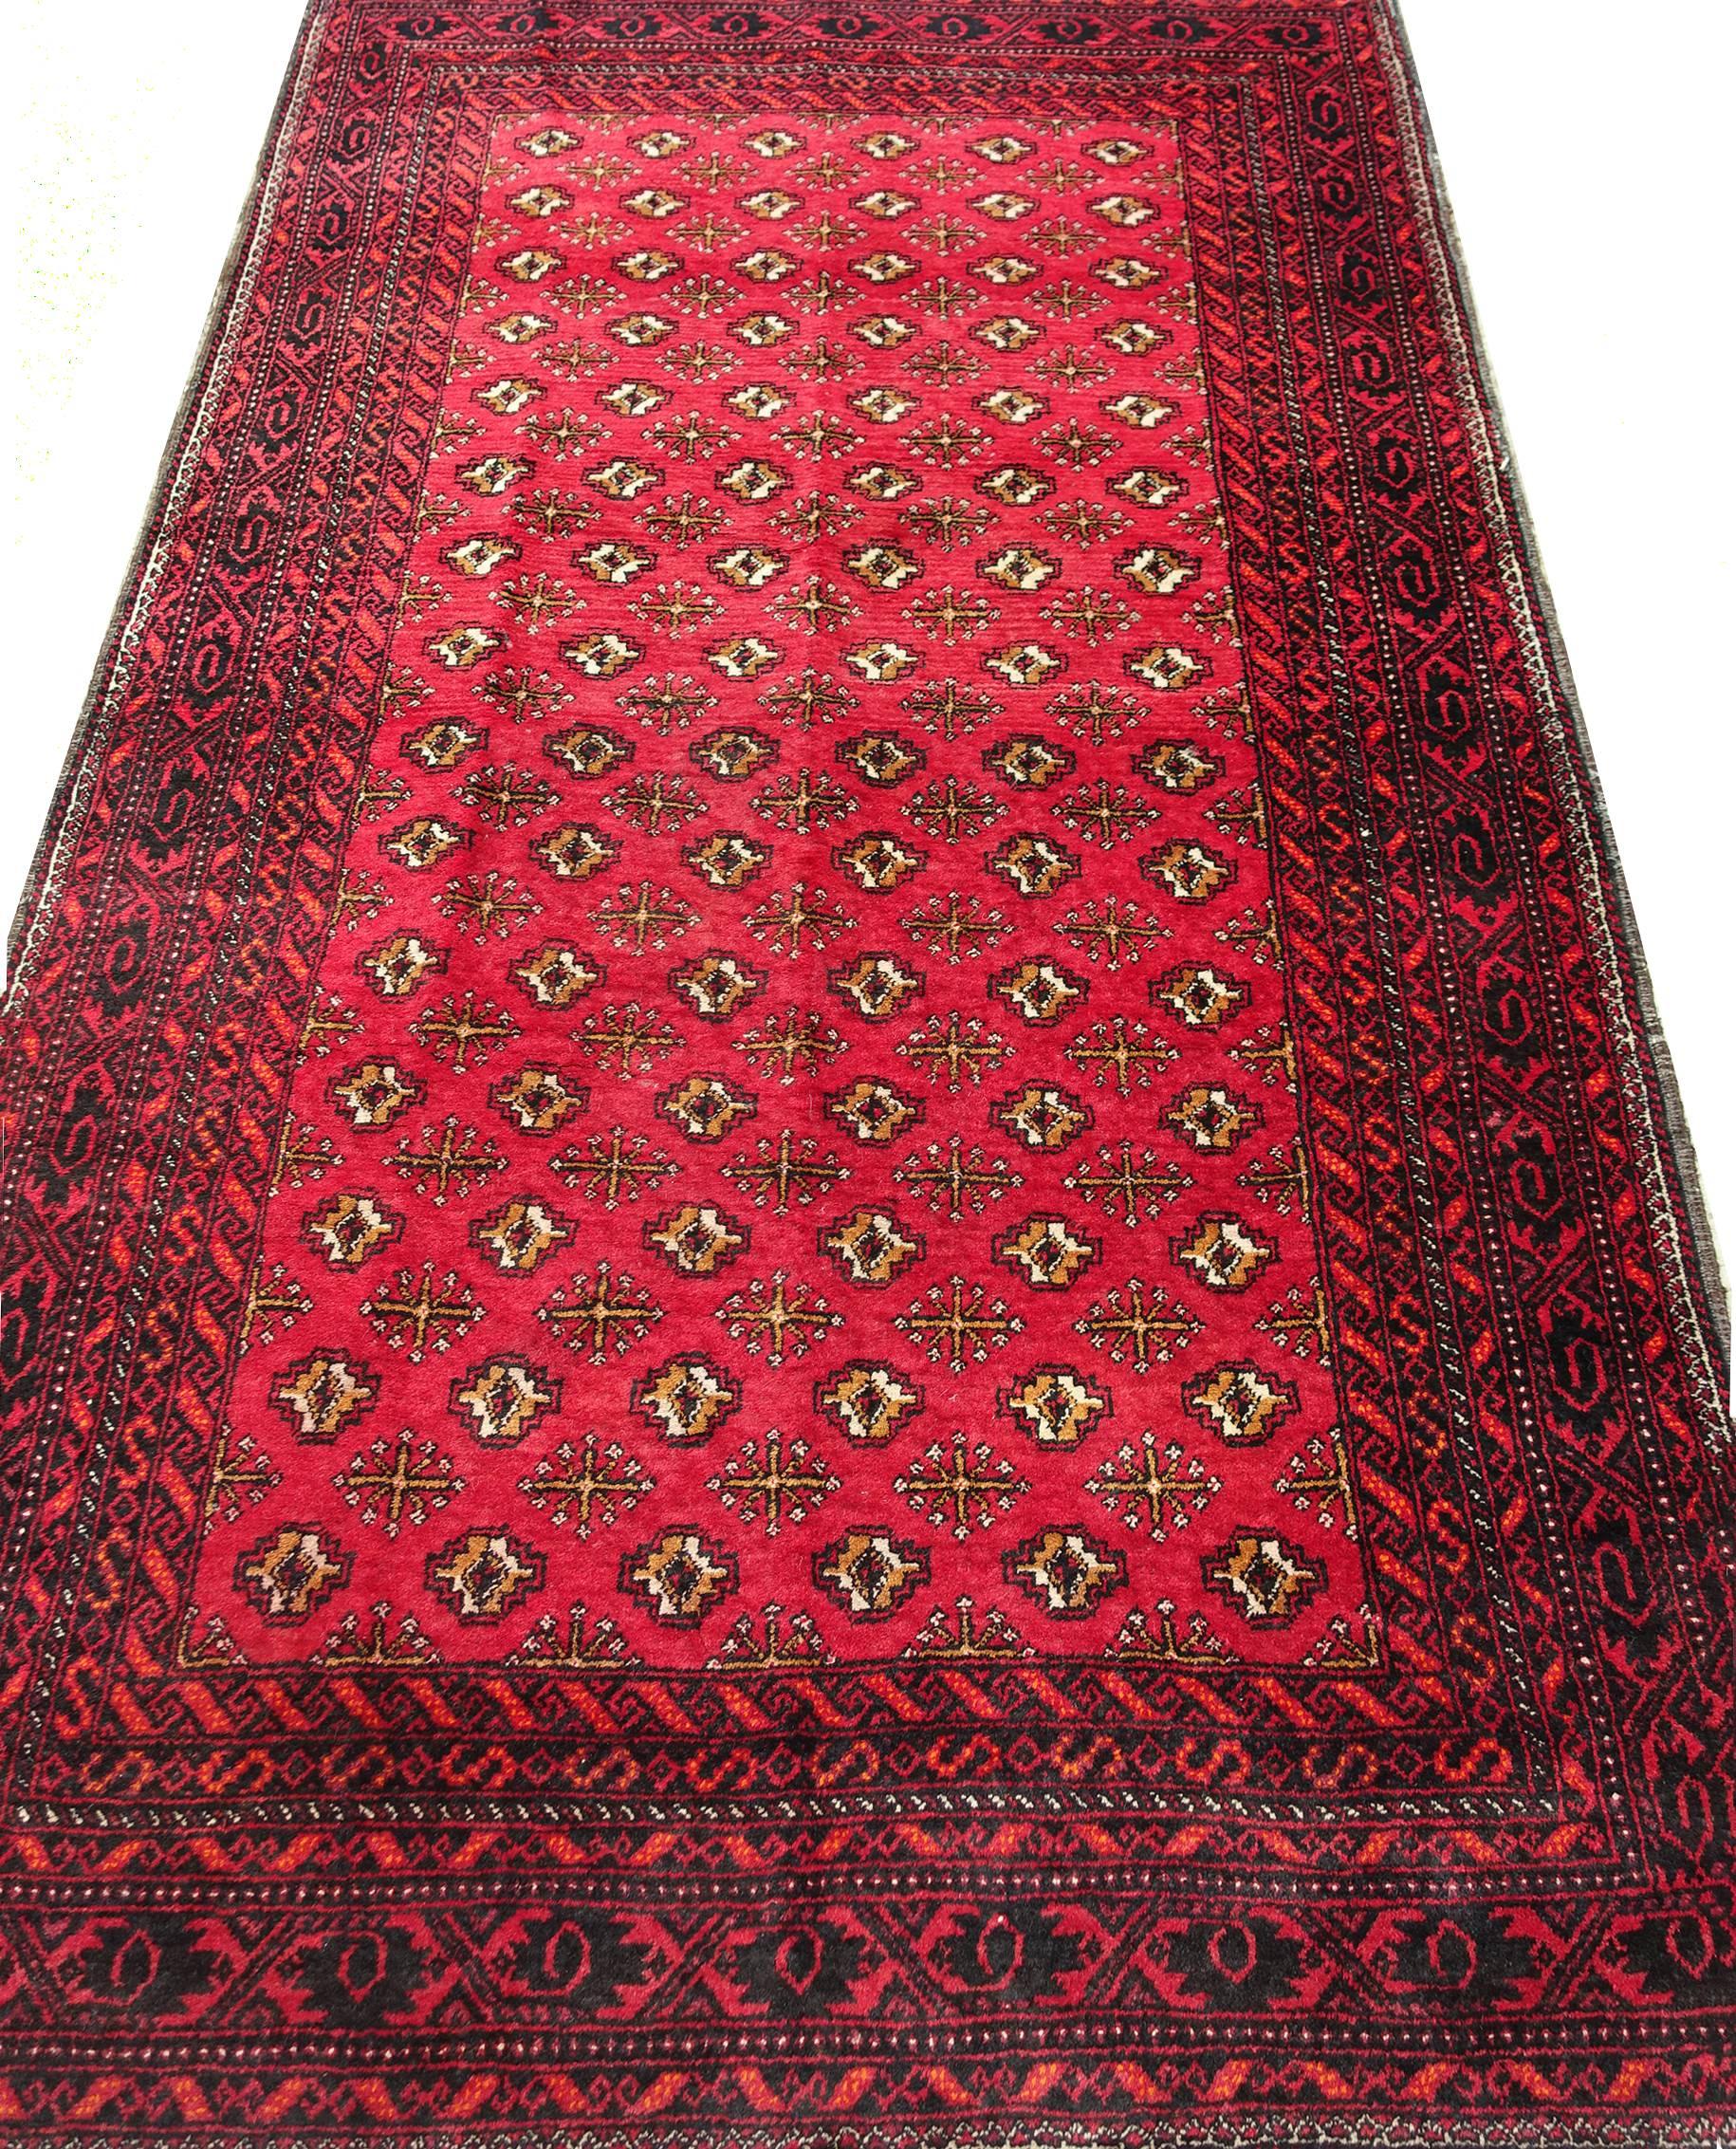 Beautiful Torkaman (Tekke) rug from Iran, circa 1970. Measures: 210 x 120 cm or 6.11' x 3.11' feet
This is a very fine quality kork wool and goat’s hair Turkoman rug with Tekke gul and rich and colorful borders. 
It measures 210 x 120 cm and it